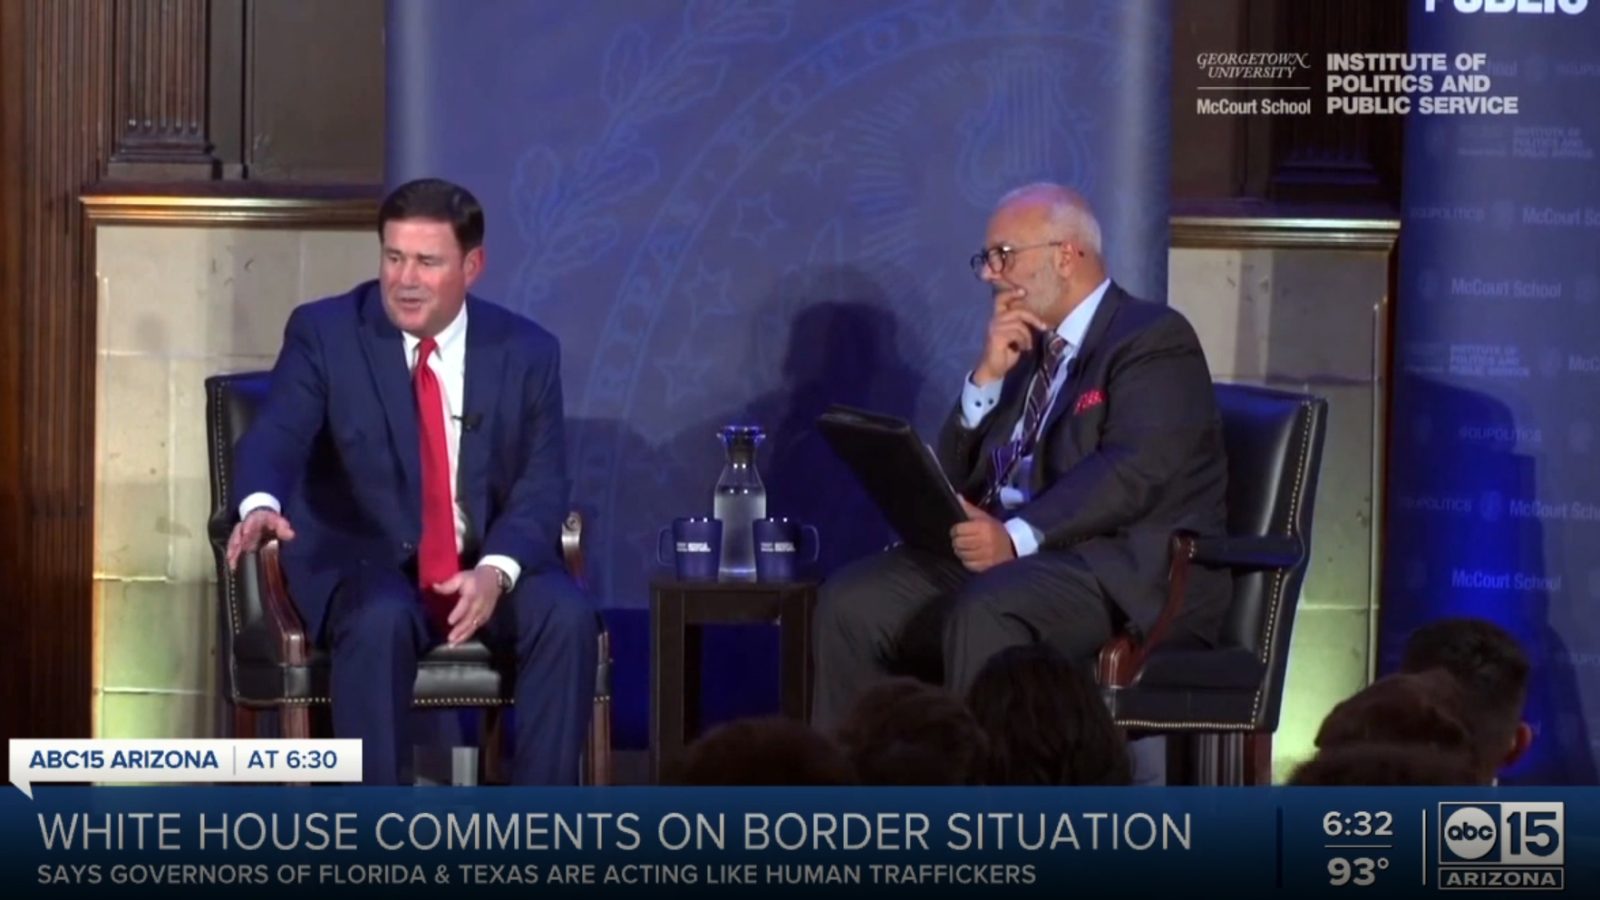 Image of Gov. Ducey & Mo Elleithee on stage during Forum event